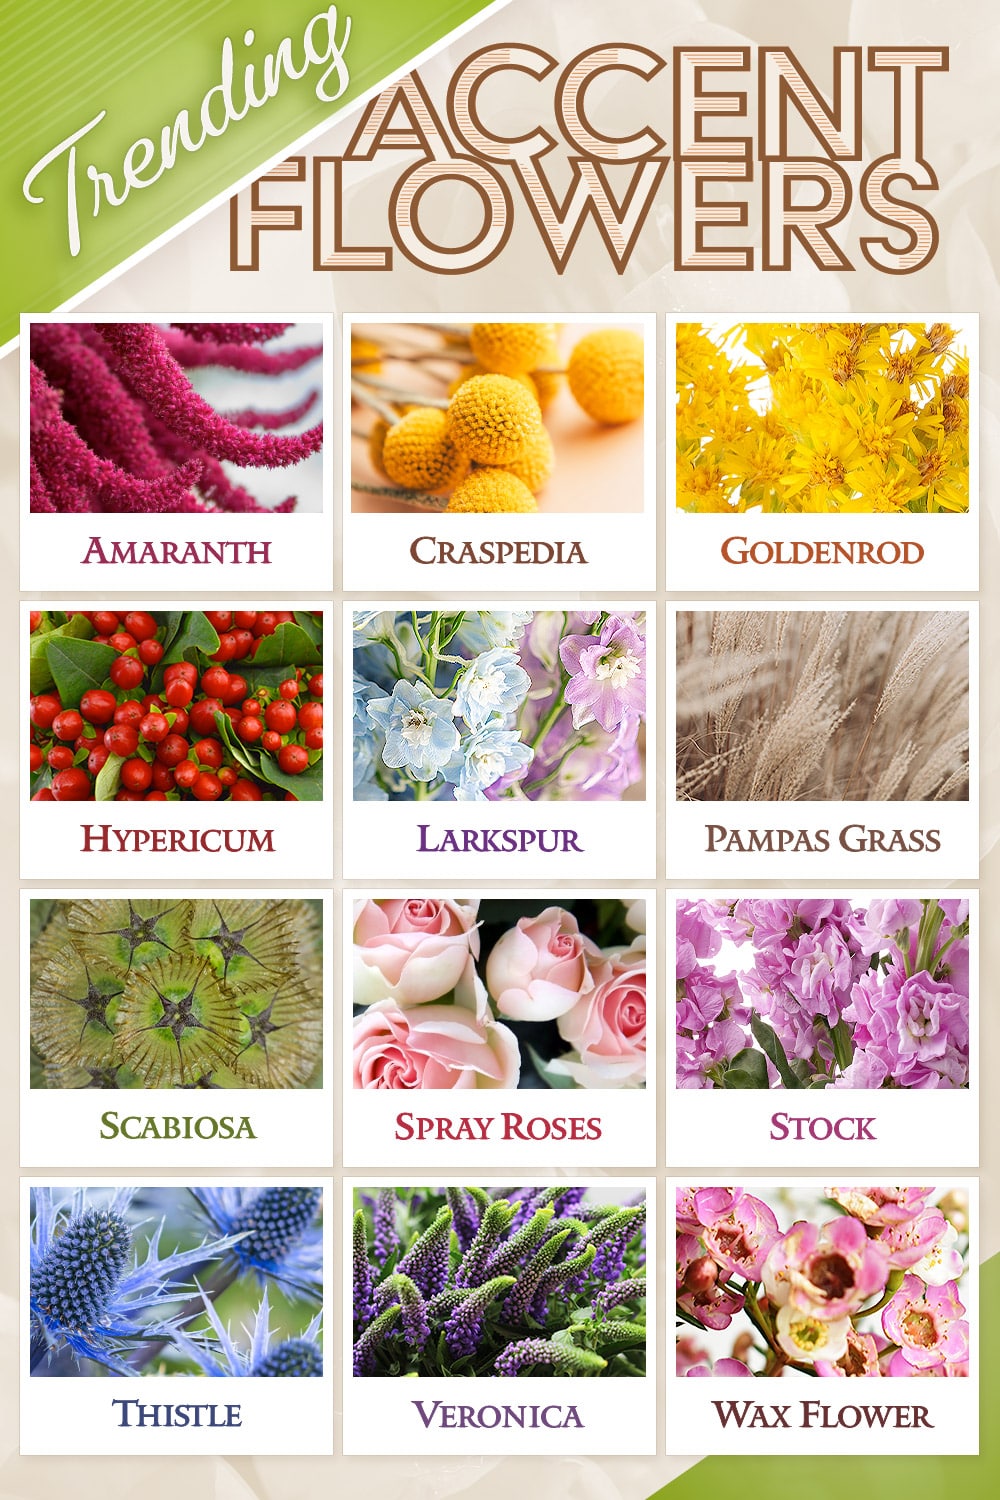 Trending Accent Flowers: Amaranth, Craspedia, Goldenrod, Hypericum, Larkspur, Pampas Grass, Scabiosa, Spray Roses, Stock, Thistile, Veronica and Wax Flowers